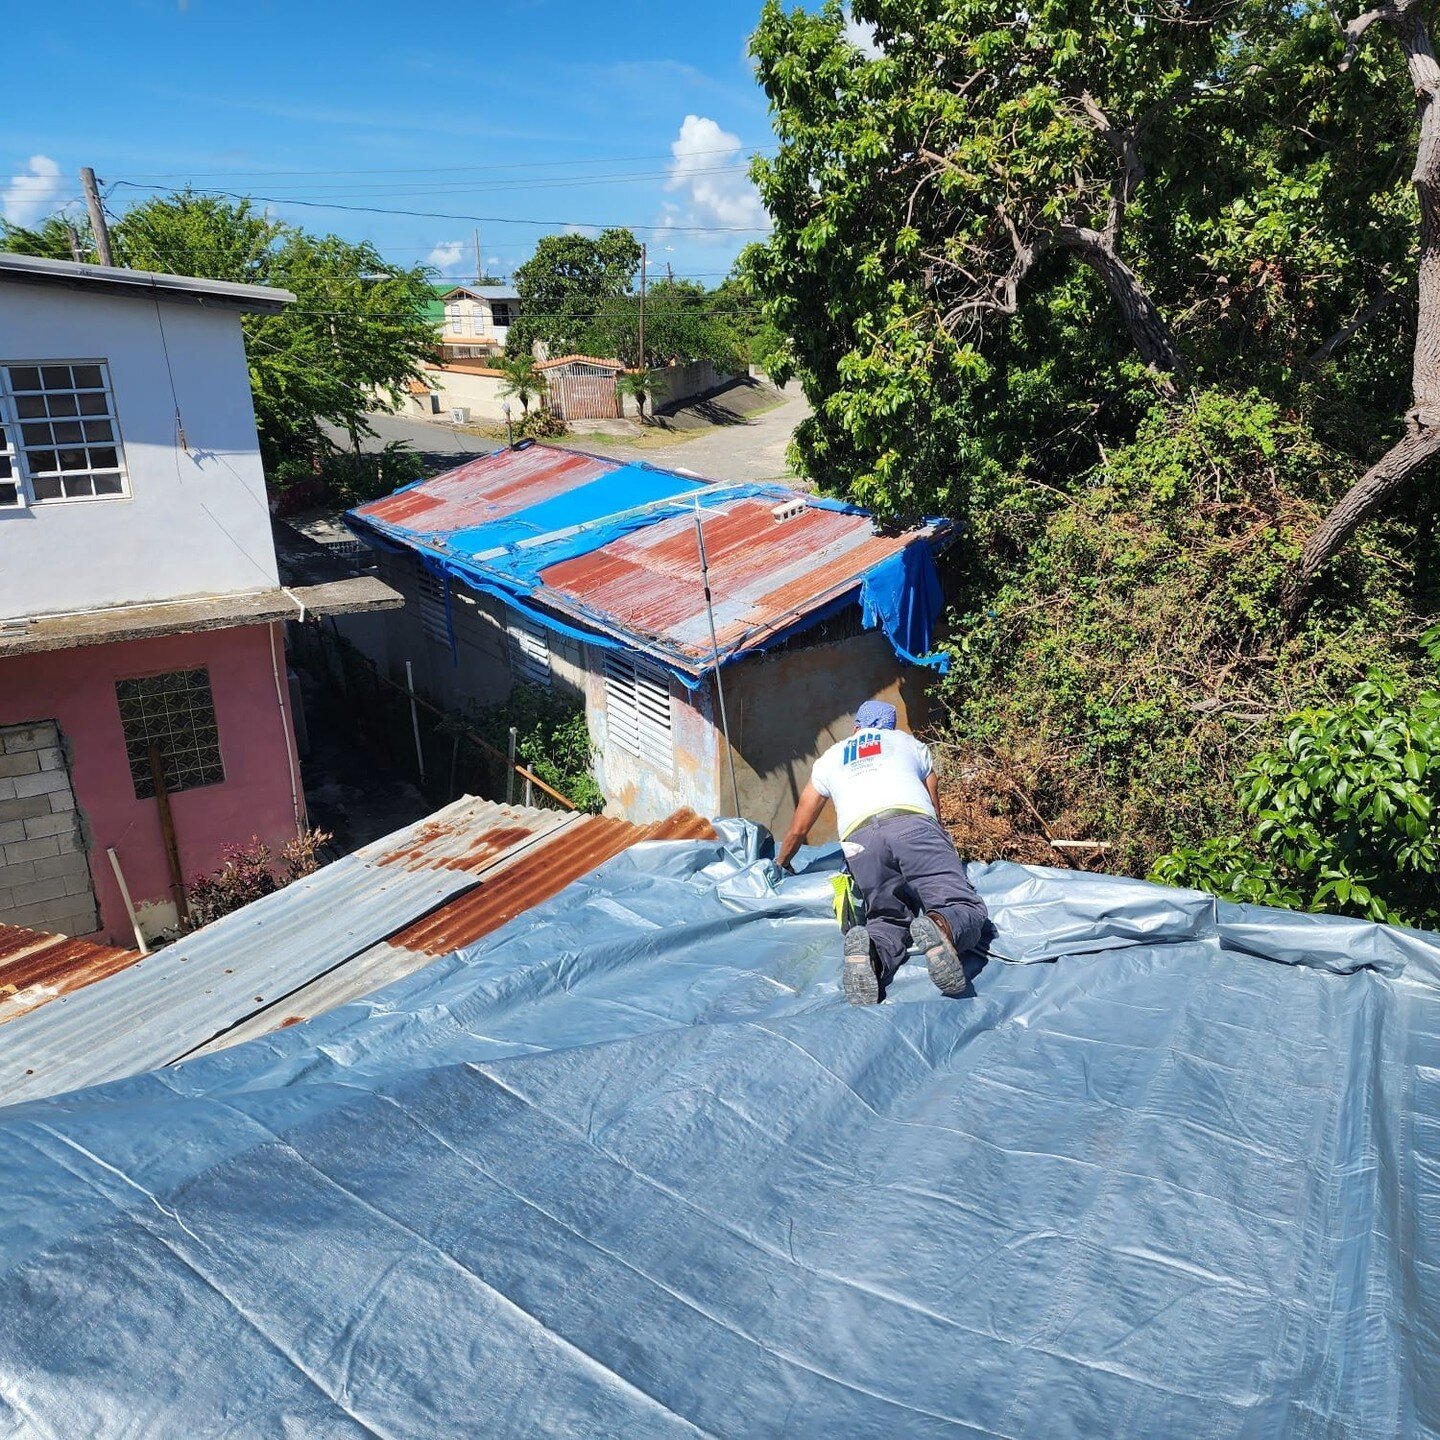 Thank you @JetBlue for getting our #highlyskilled volunteers to #PuertoRico to assess damaged homes and tarp/repair roofs of #firstresponders who are serving their communities and the homes of the community at large. We are grateful for all your supp